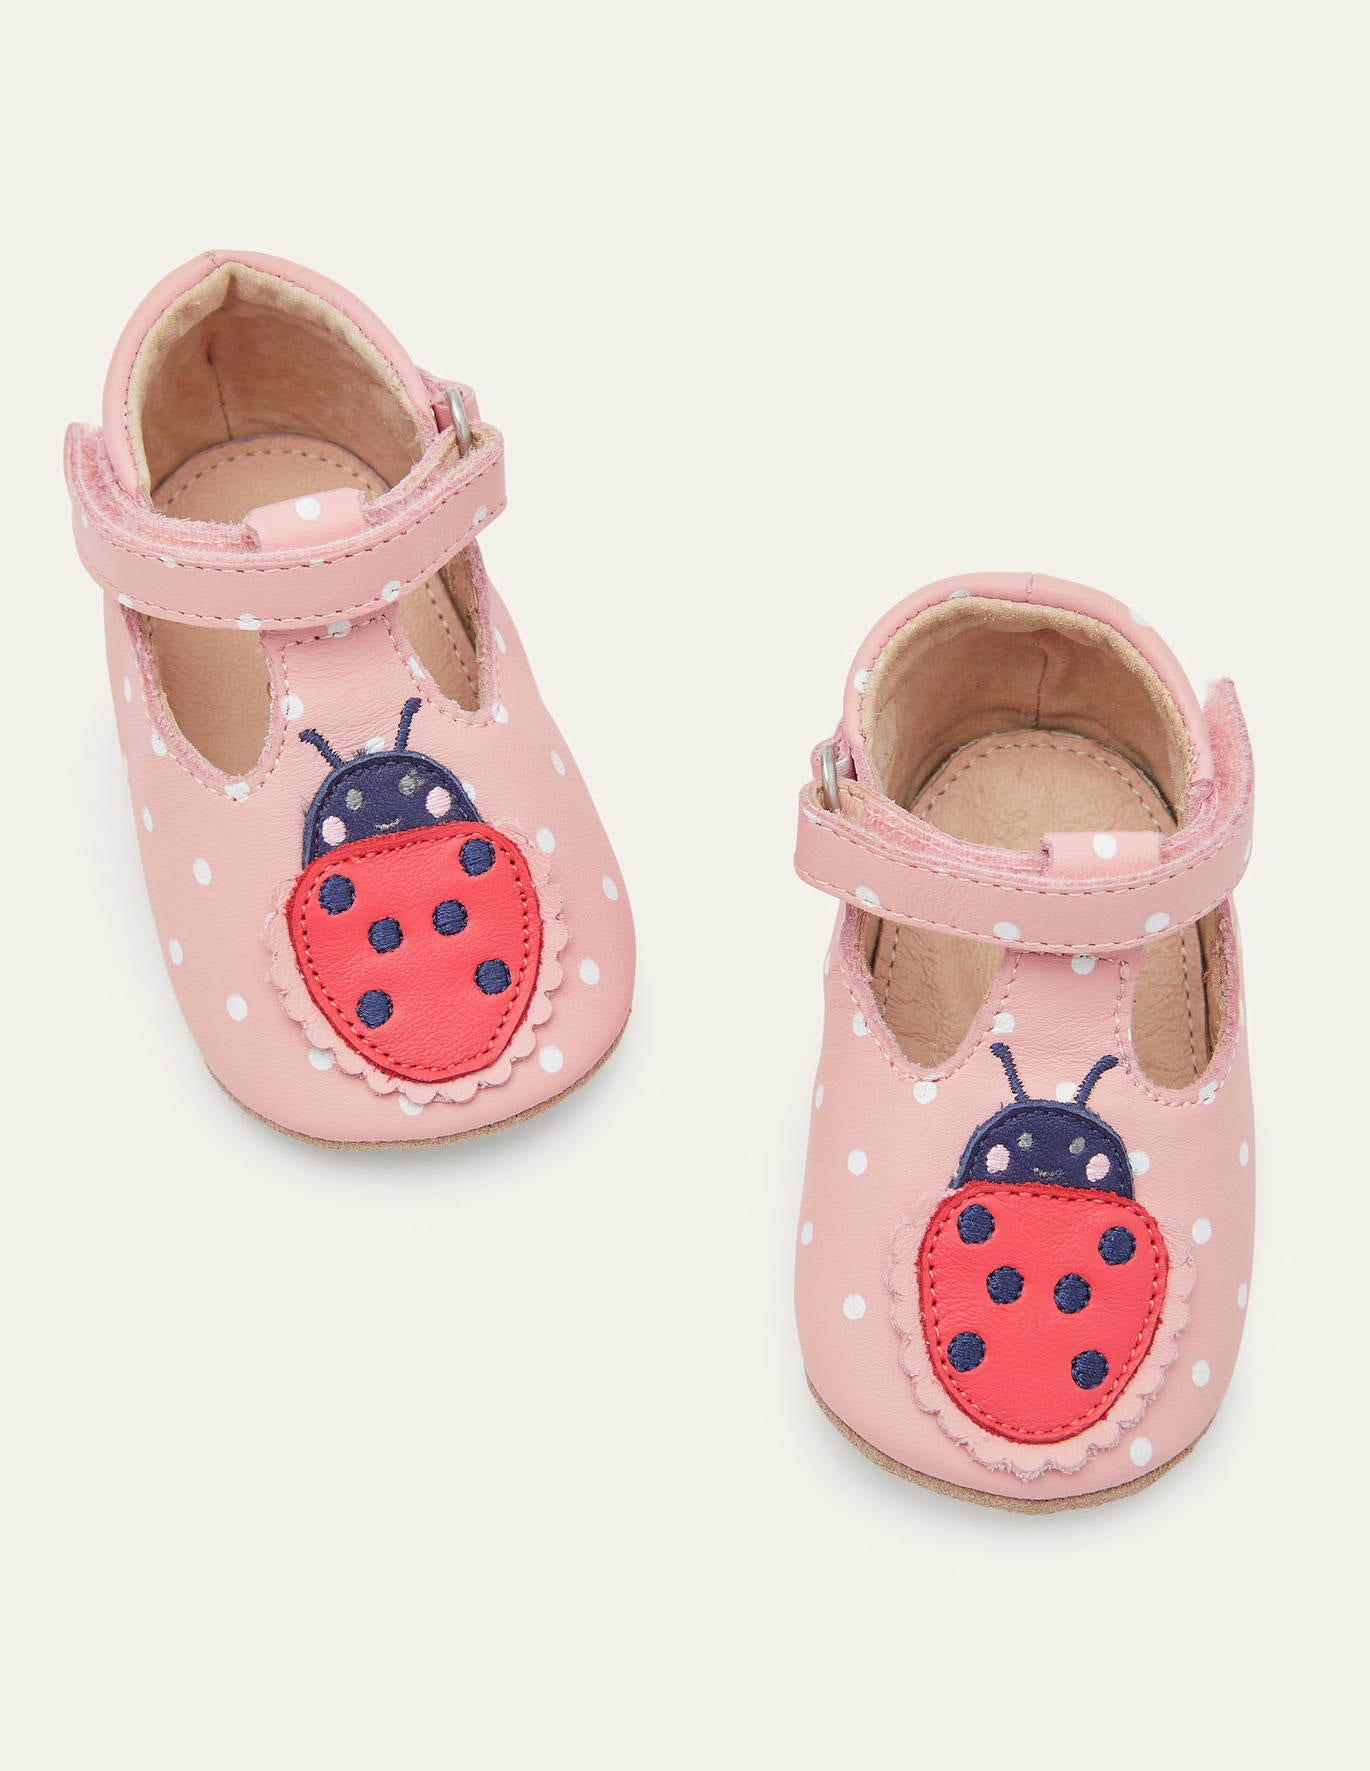 Boden Novelty Leather Baby Shoes - Pink Ladybird